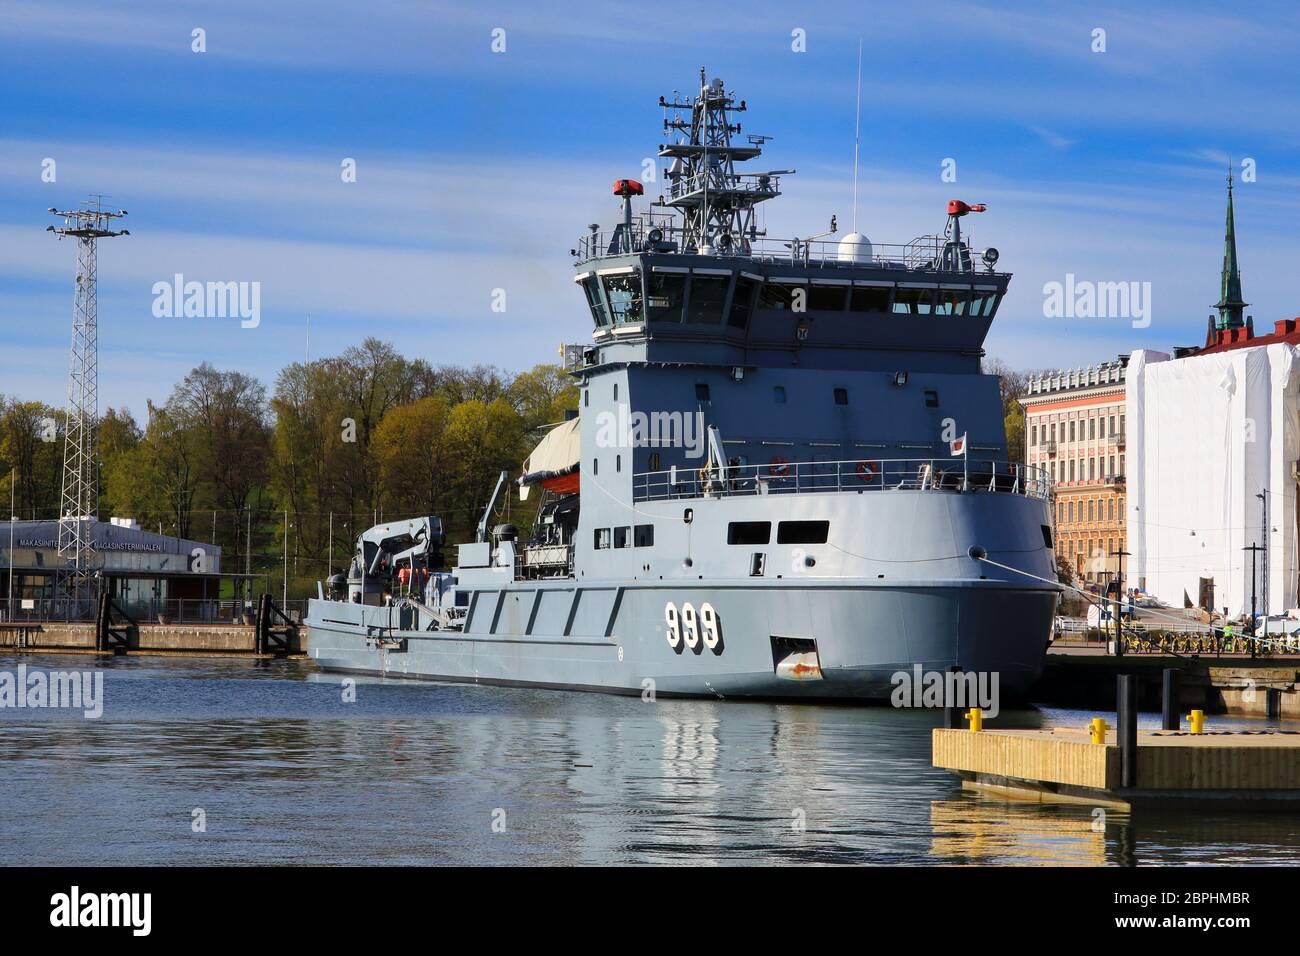 Multipurpose oil and chemical spill response vessel Louhi, pennant no 999, owned by the Finnish Environment Institute. Helsinki, FI. May 19, 2020. Stock Photo